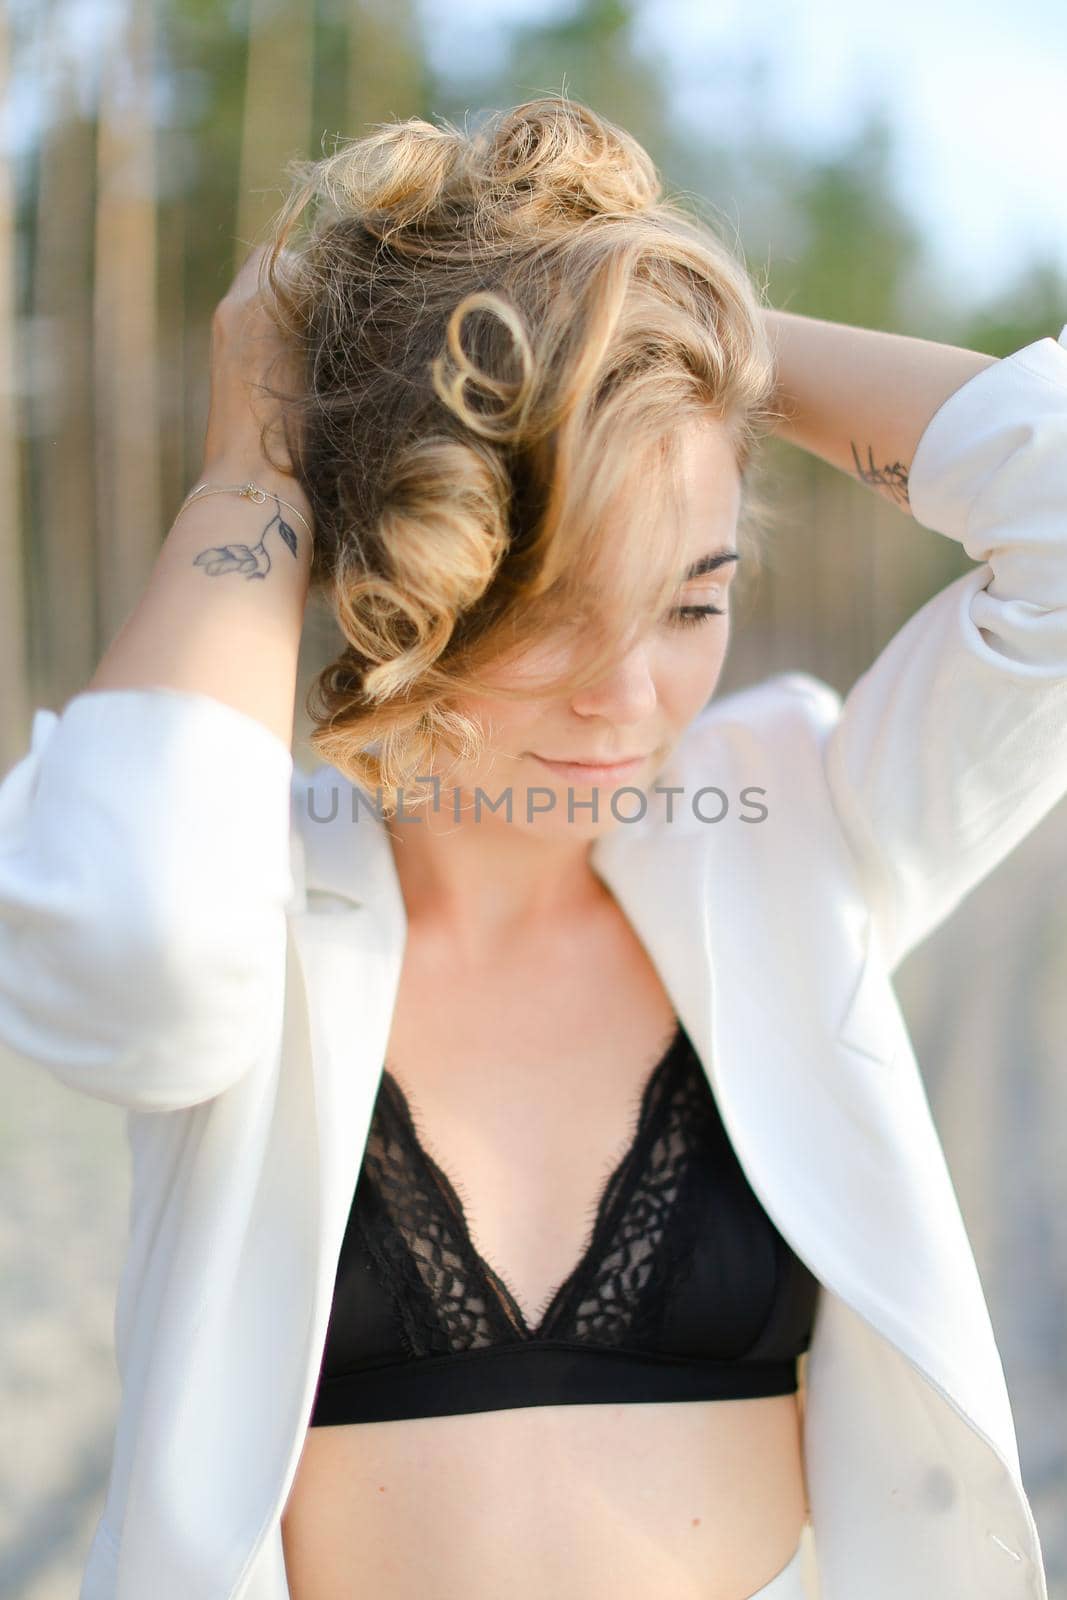 Portraint of young nice girl with little hand tattoo wearing white shirt and black bra. Concept of beauty.